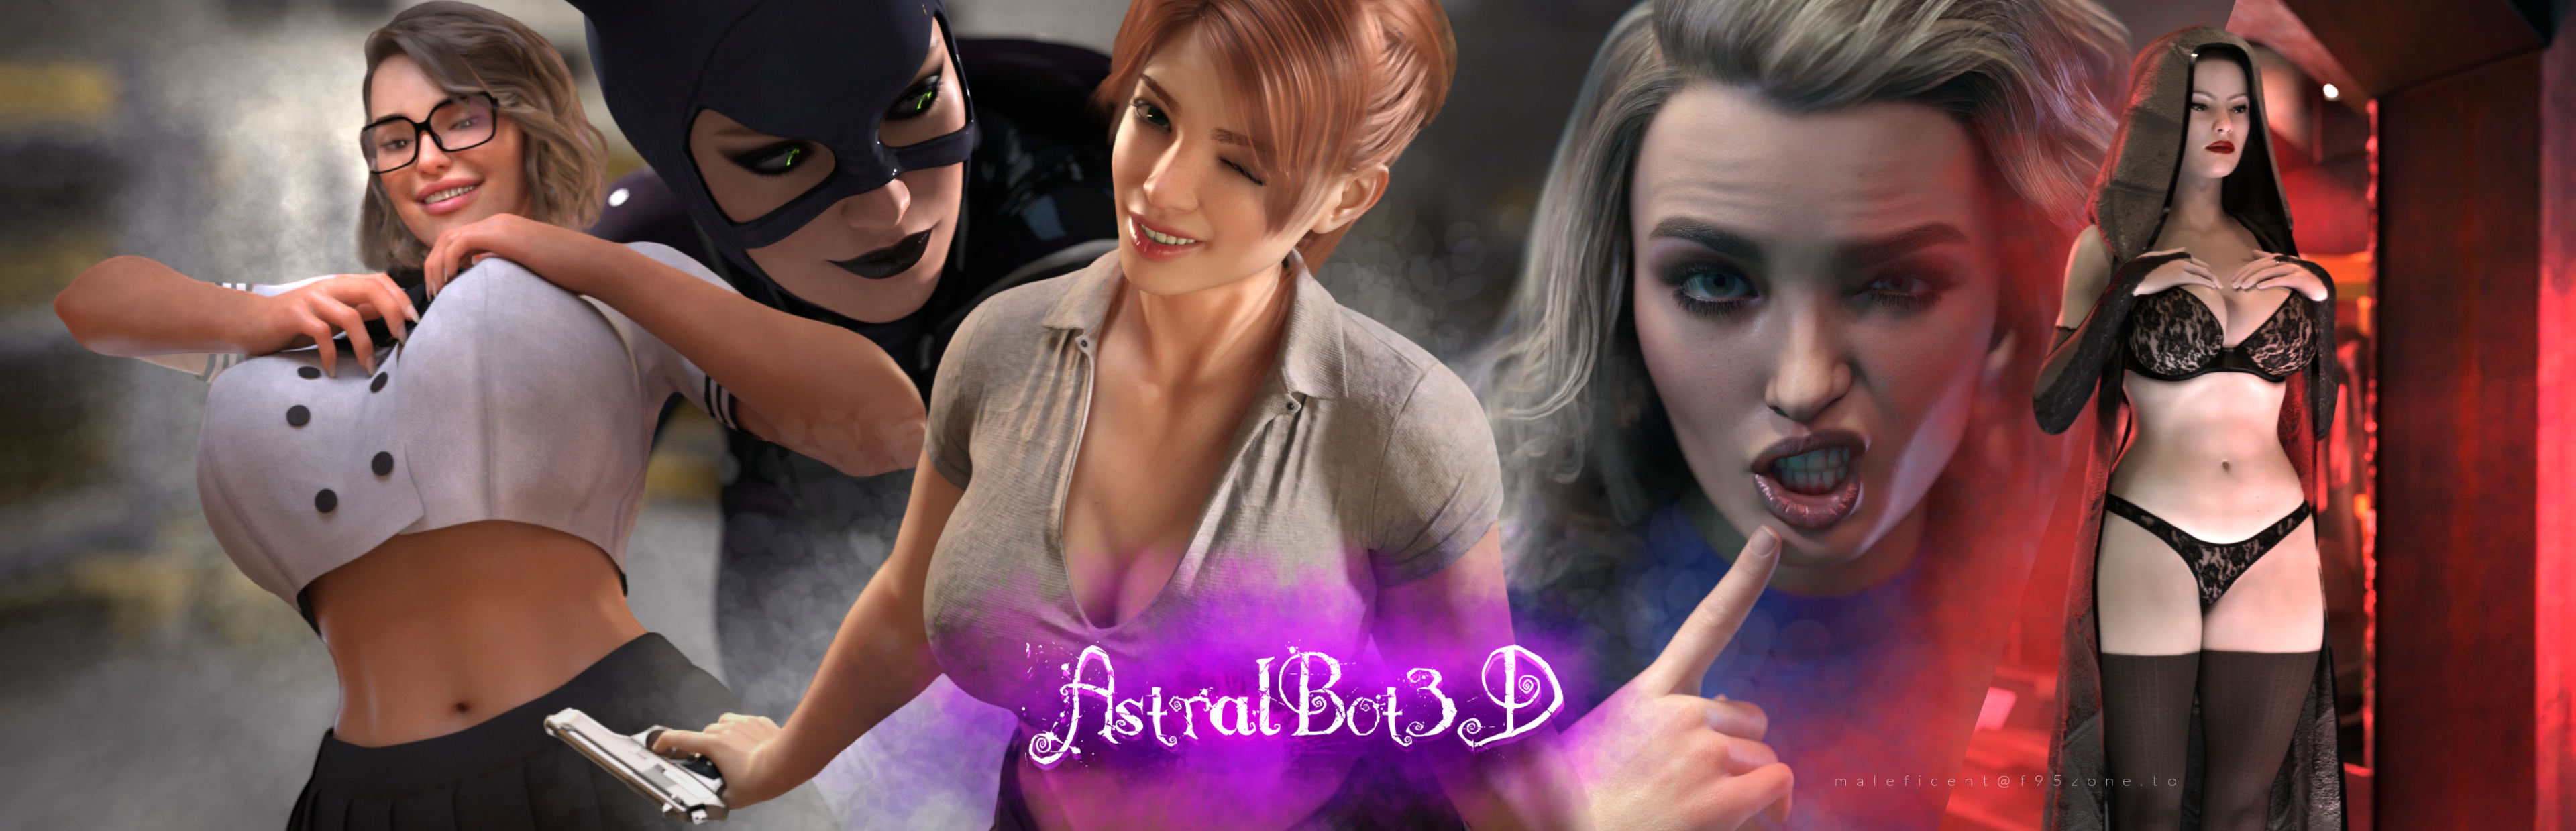 astralbot3d_custom-cover_by_maleficent.png